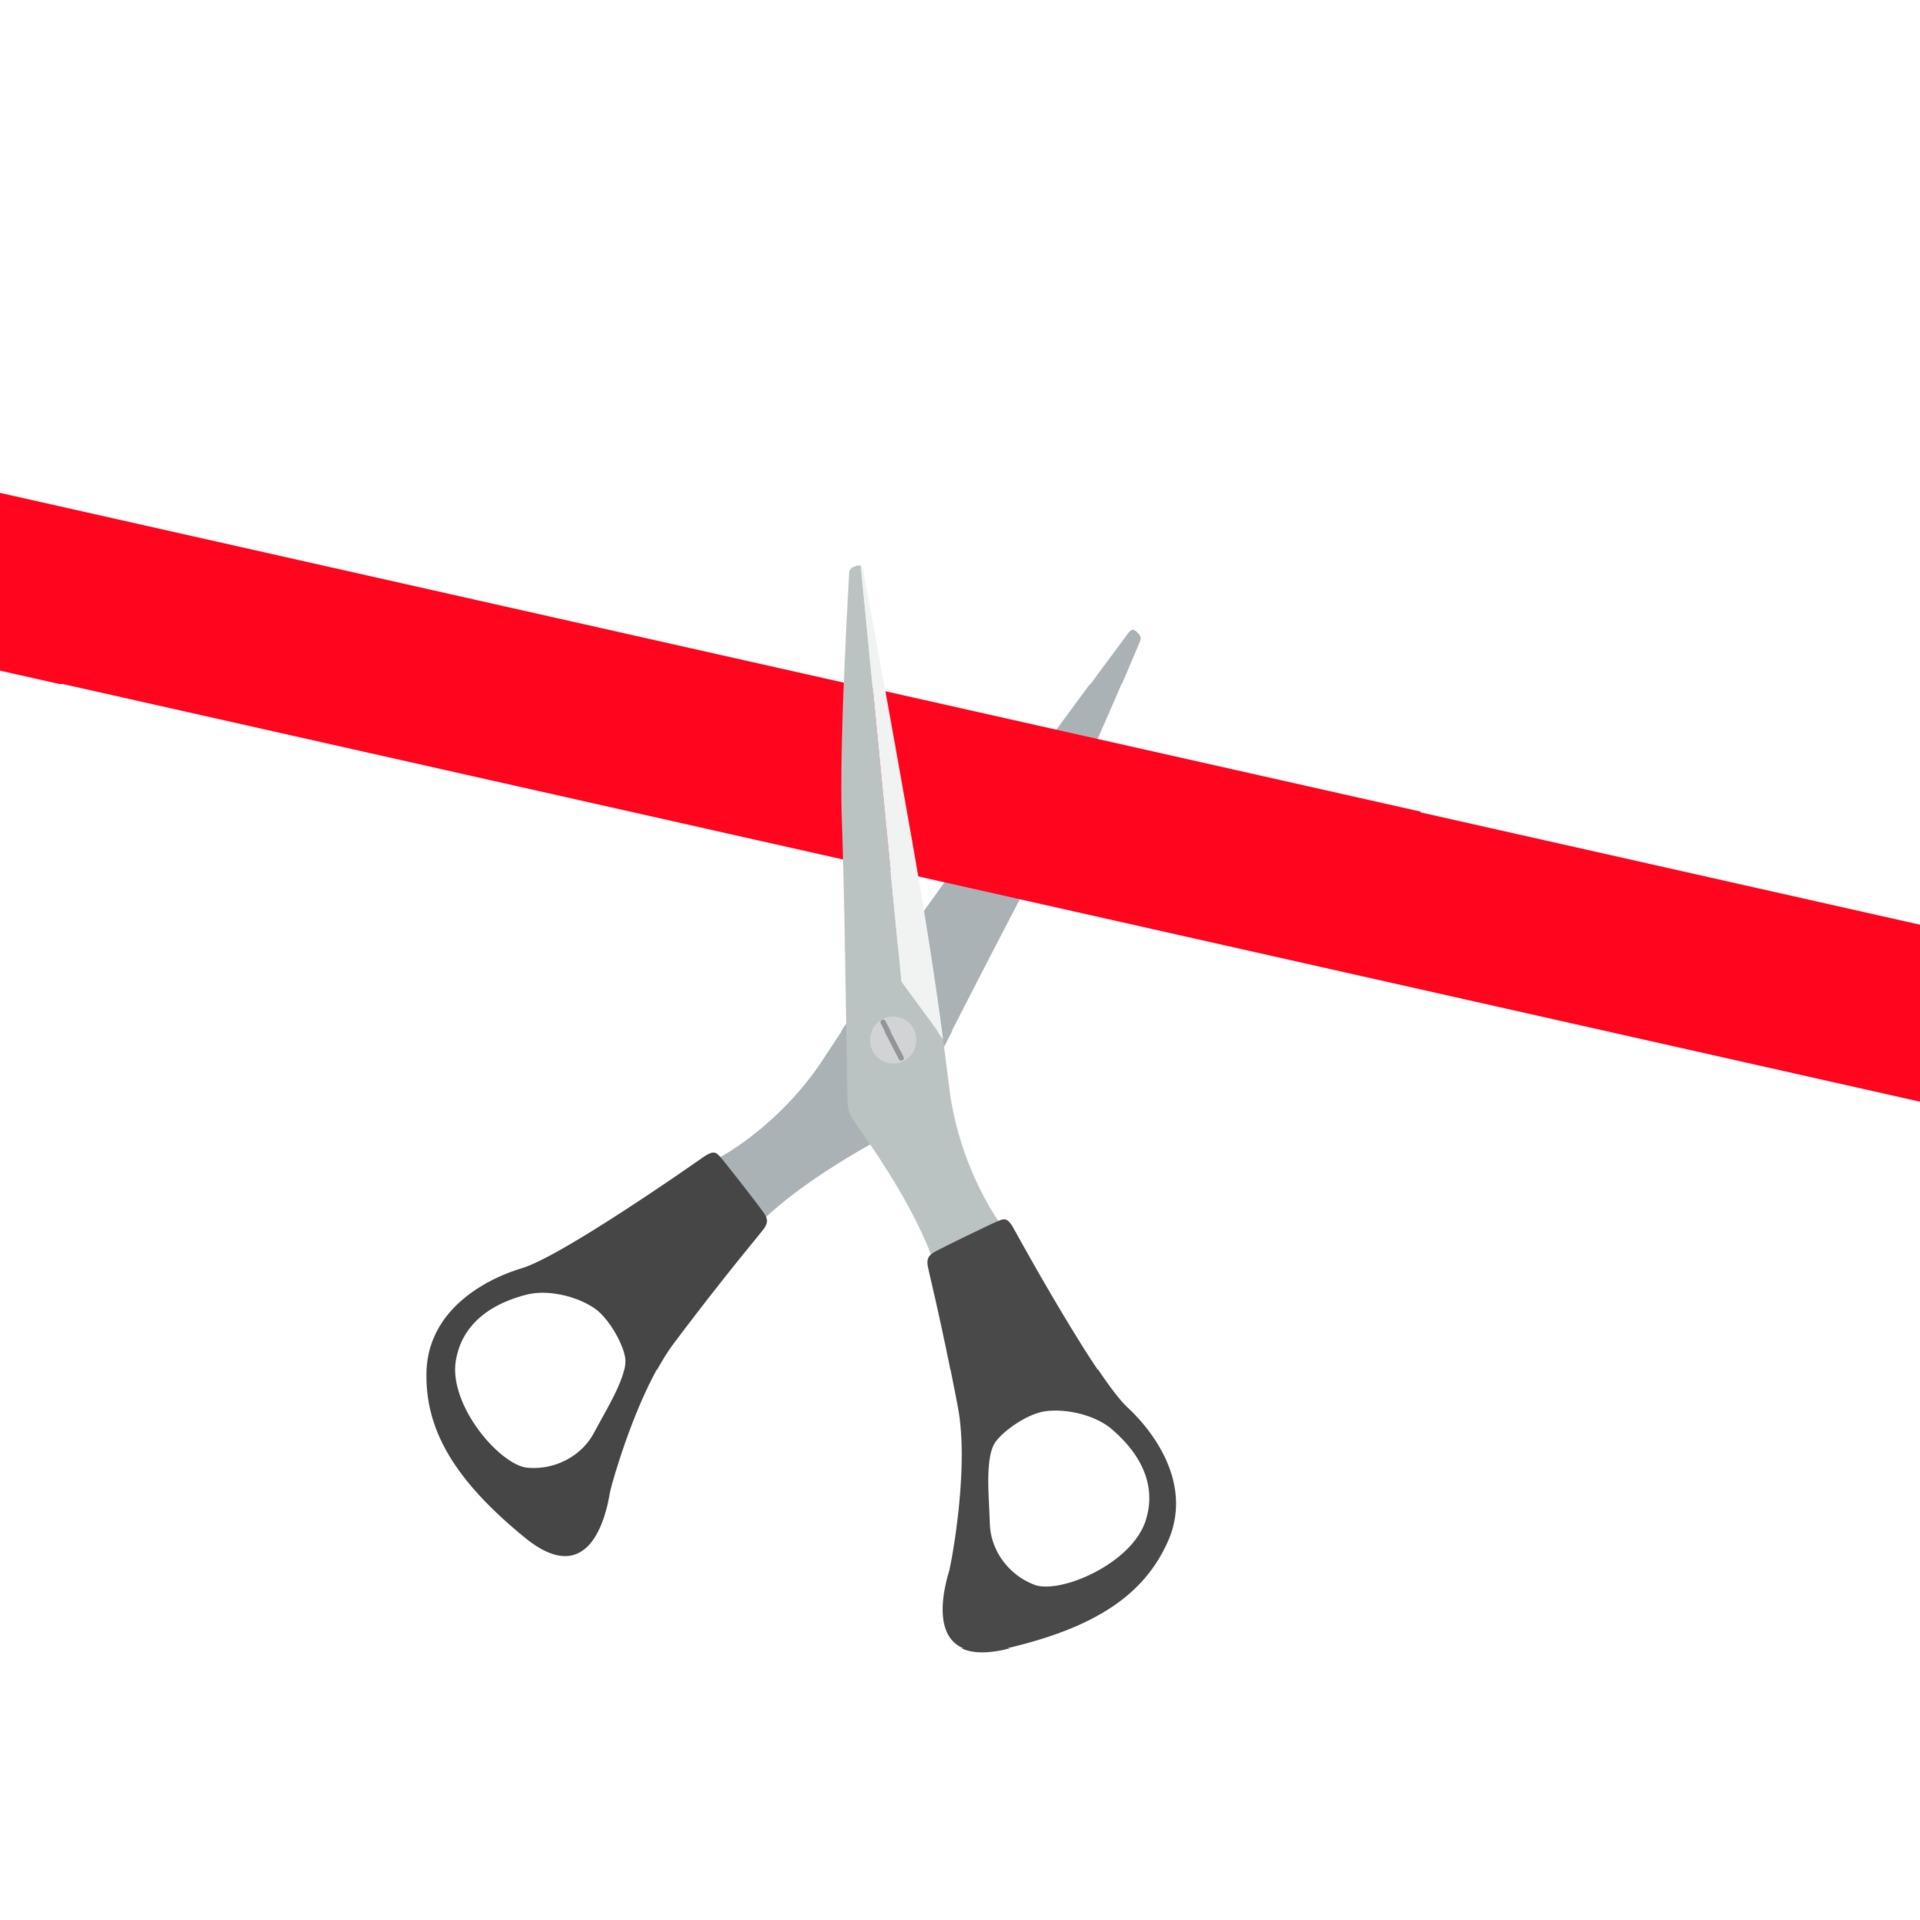 https://static.vecteezy.com/system/resources/previews/003/356/147/original/scissors-cutting-red-ribbon-grand-opening-concept-free-vector.jpg